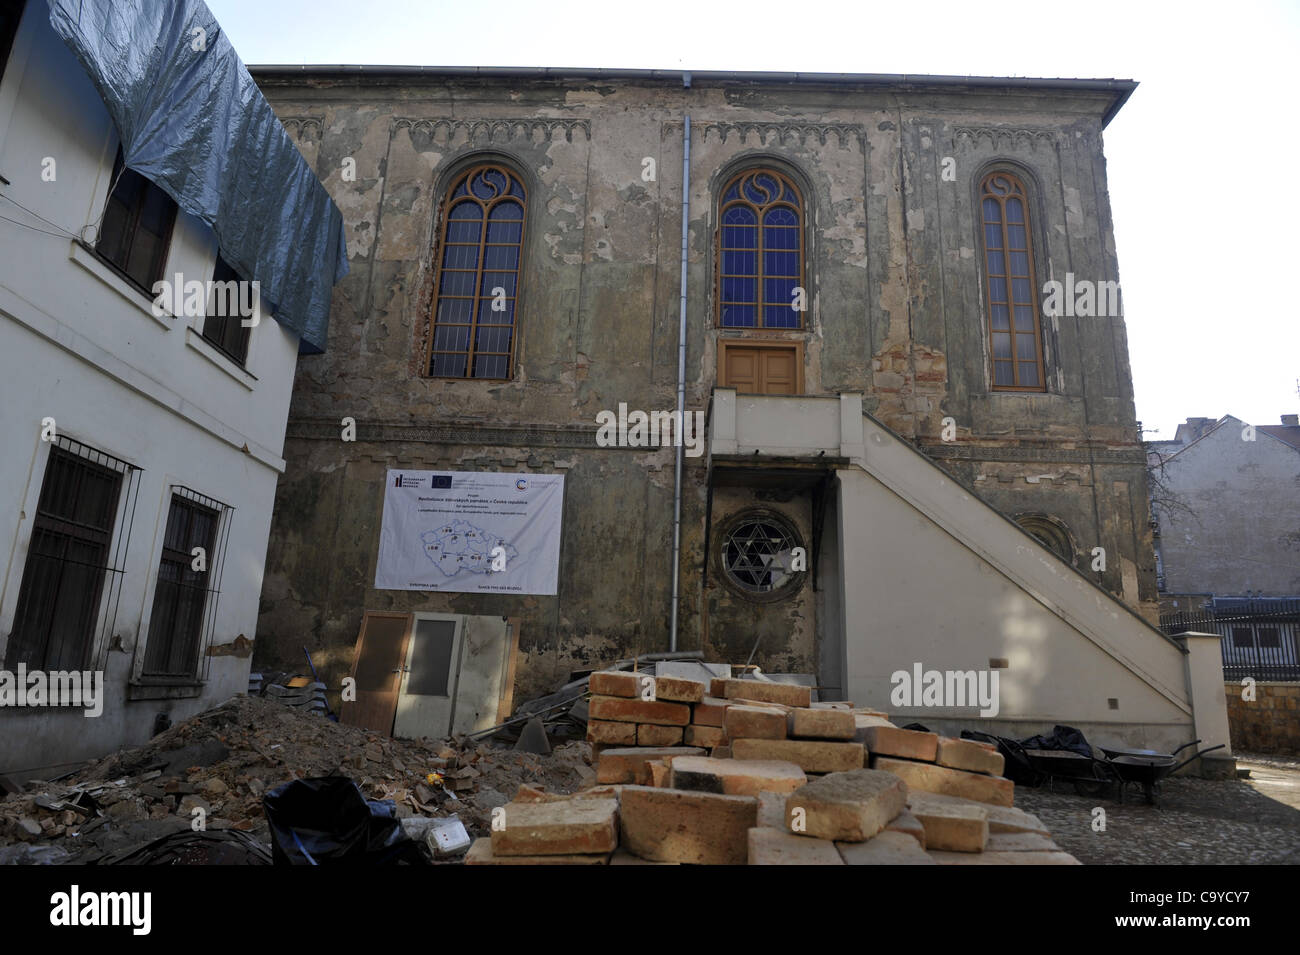 Extensive reconstructions taking place in synagogues in Pilsen. Old synagogue (pictured) is being reconstructed with support of the EU. After the reconstruction synagogue will continue to host cultural events and will also serve as prayer room for small jewish community of the city. Pilsen, Czech Re Stock Photo